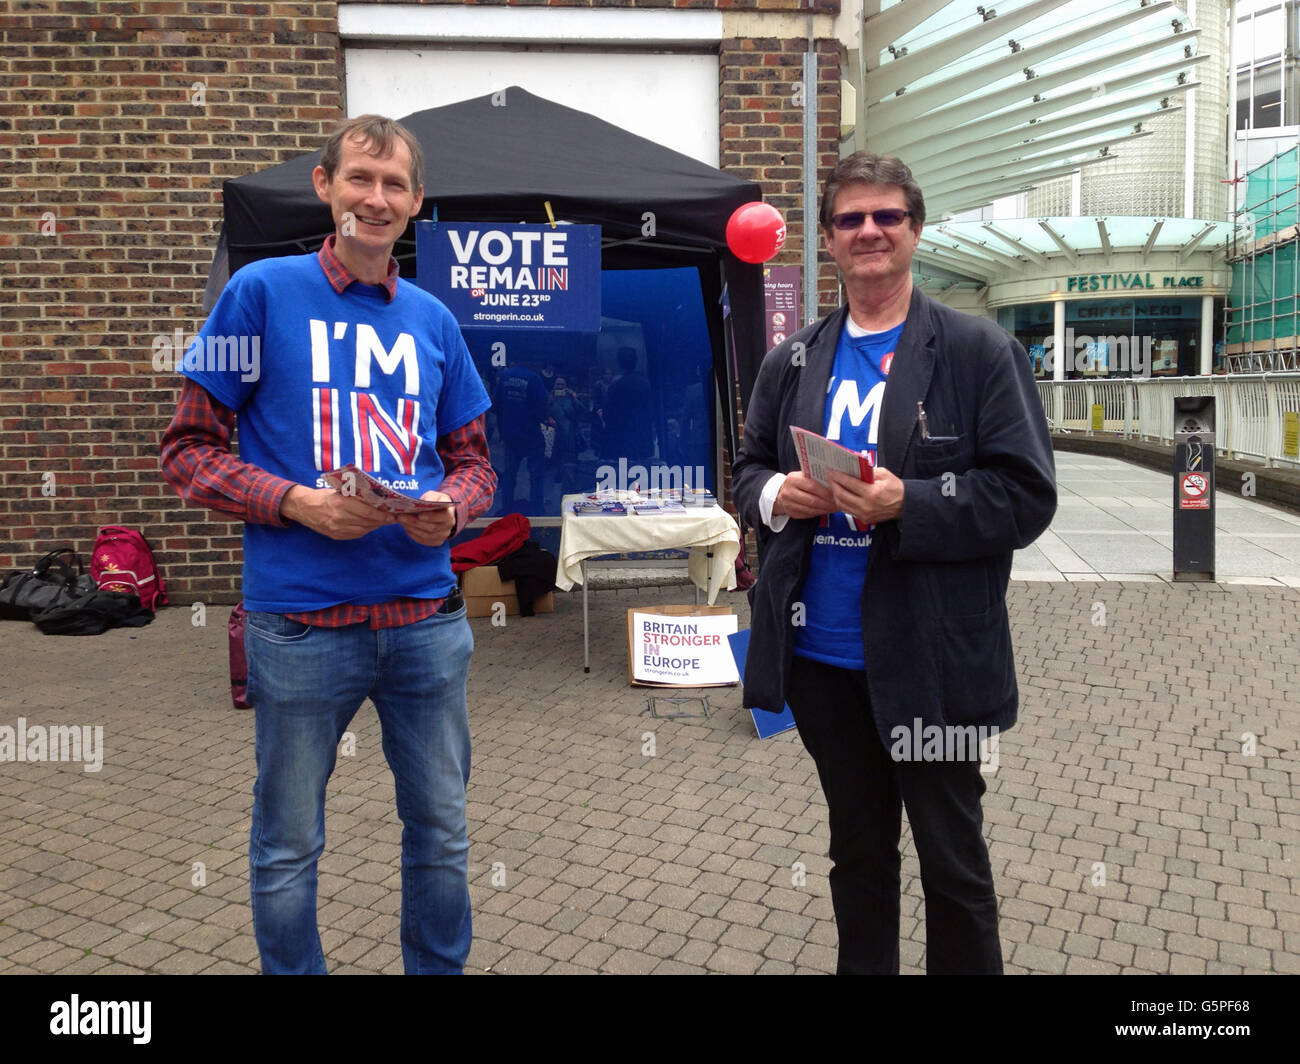 BASINGSTOKE, UK - JUNE 22, 2016: Campaigners urging voters to Remain in the European Union with less than a day to go before the UK's referendum.  Cloudy morning in Basingstoke town centre, Hampshire. Credit:  Amanda Lewis/Alamy Live News Stock Photo